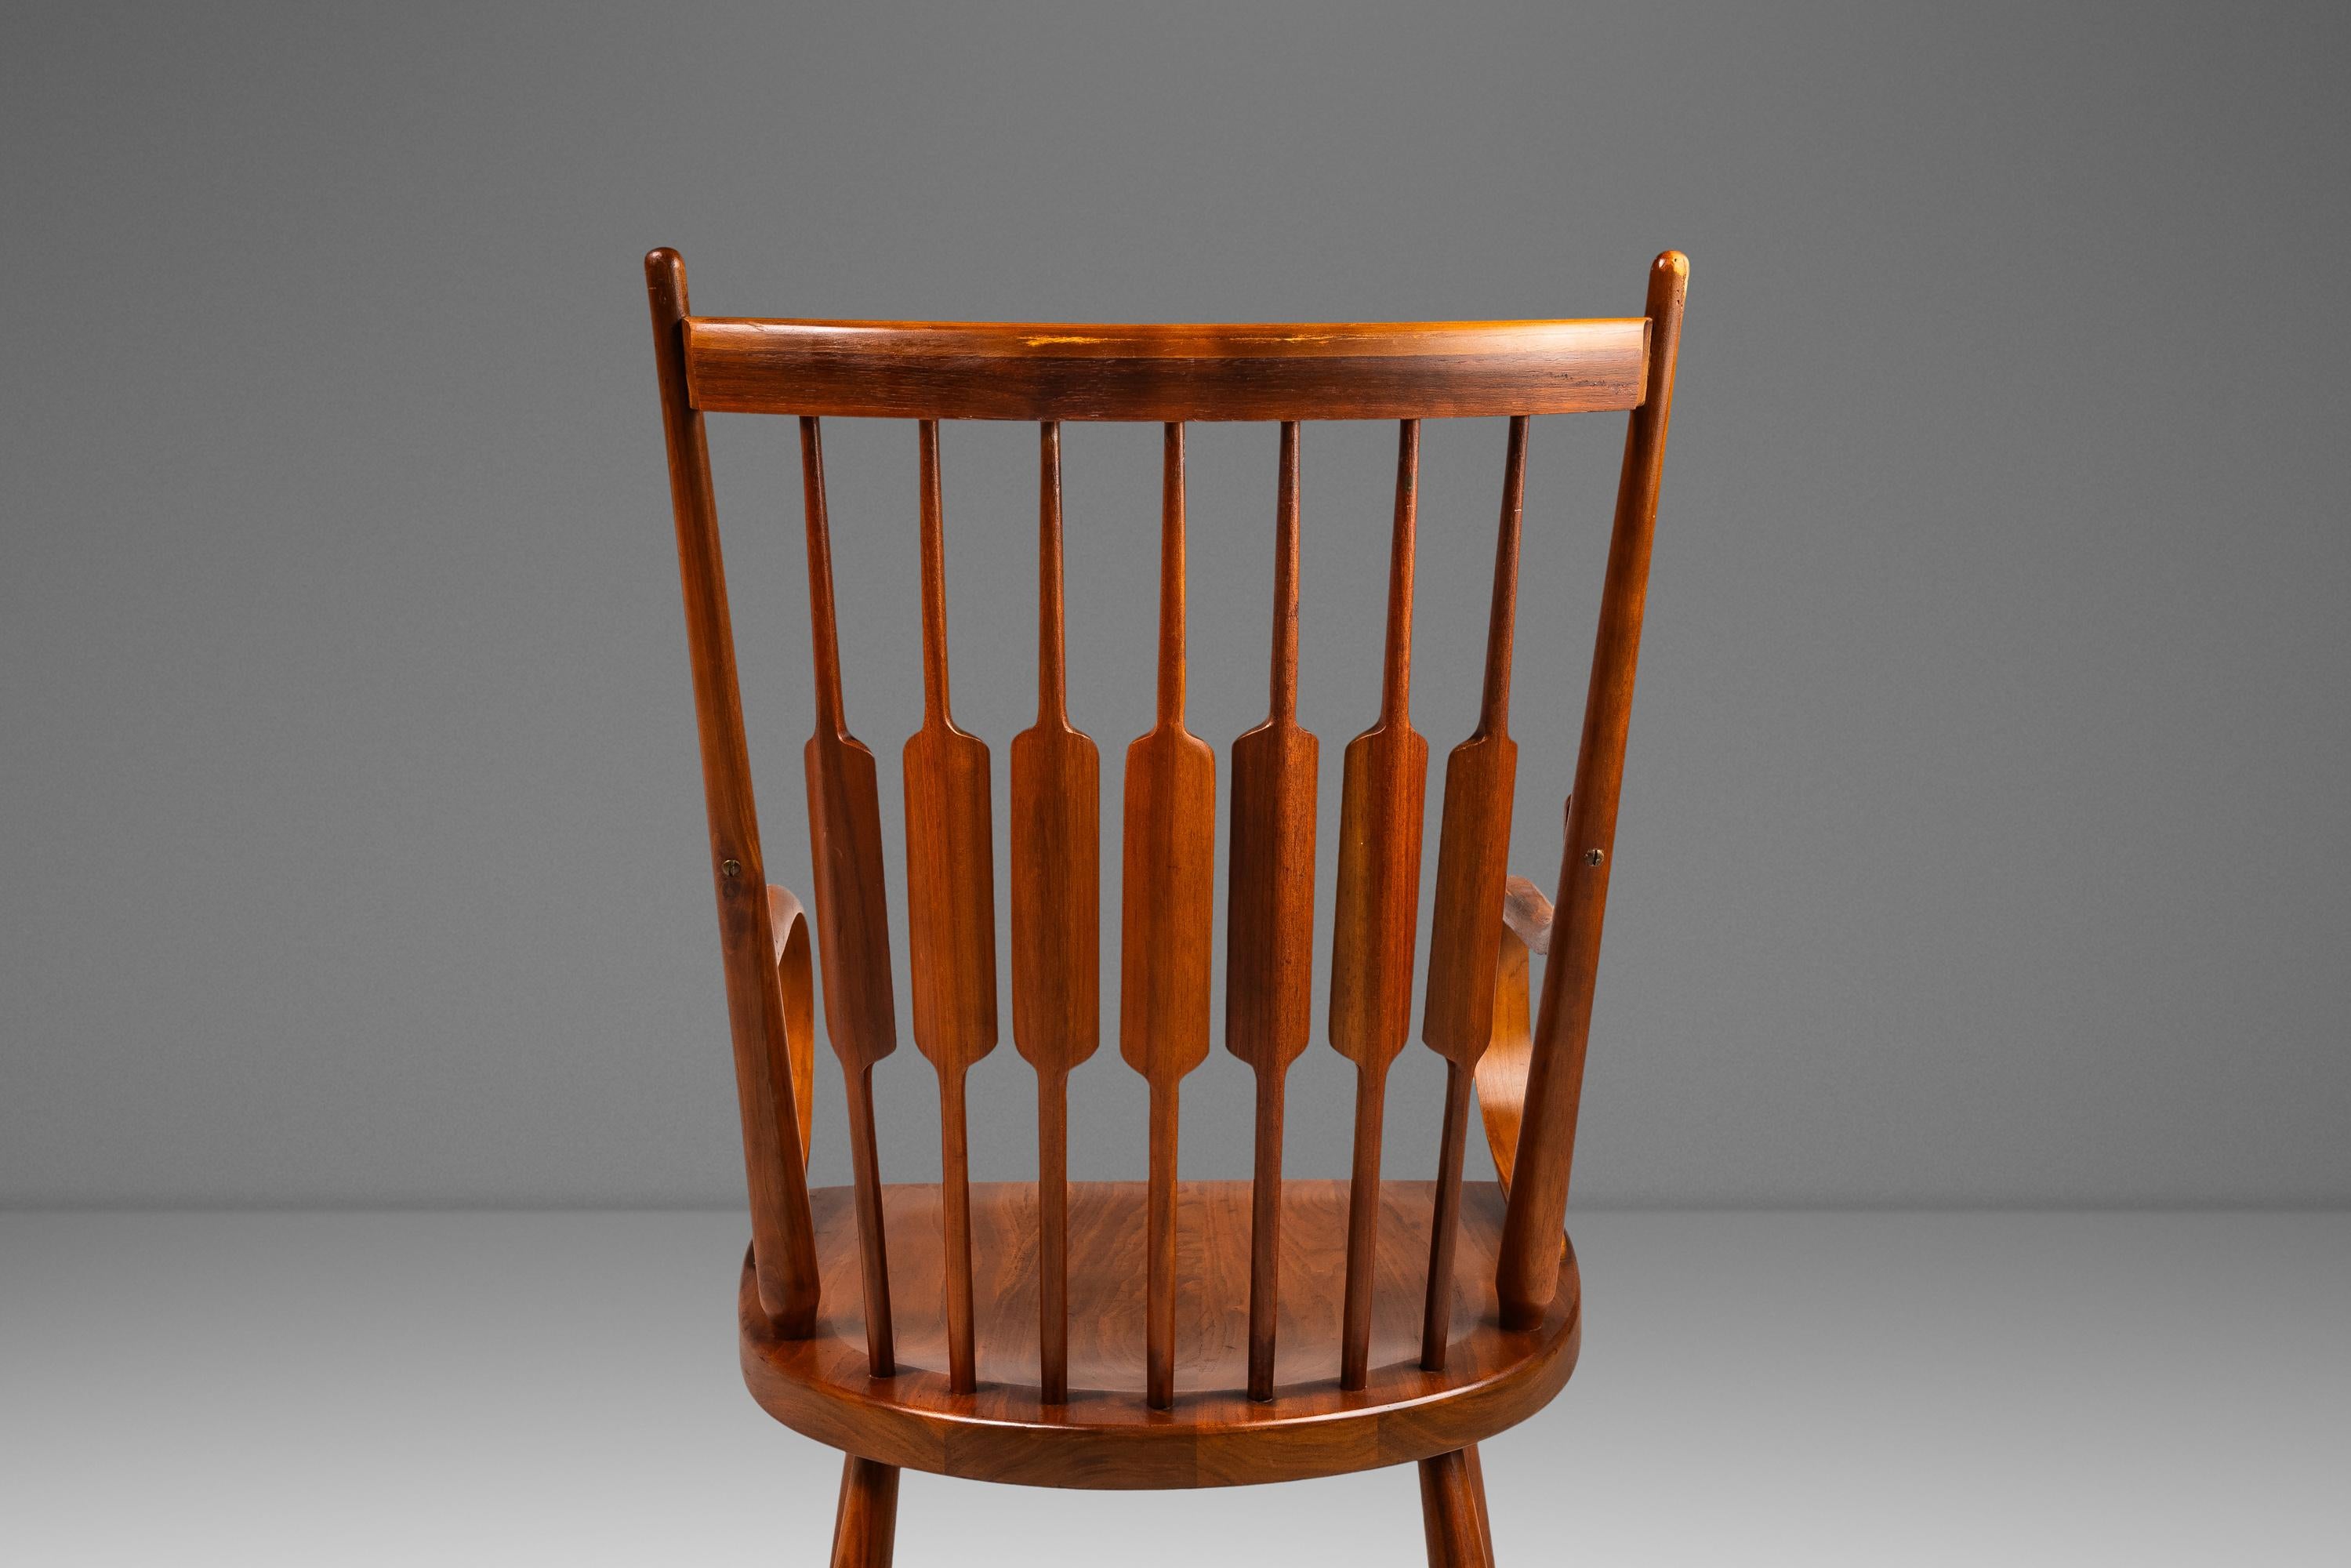 Set of 2 Windsor Chairs in Solid Walnut by Kipp Stewart for Drexel, USA, c. 1960 For Sale 7